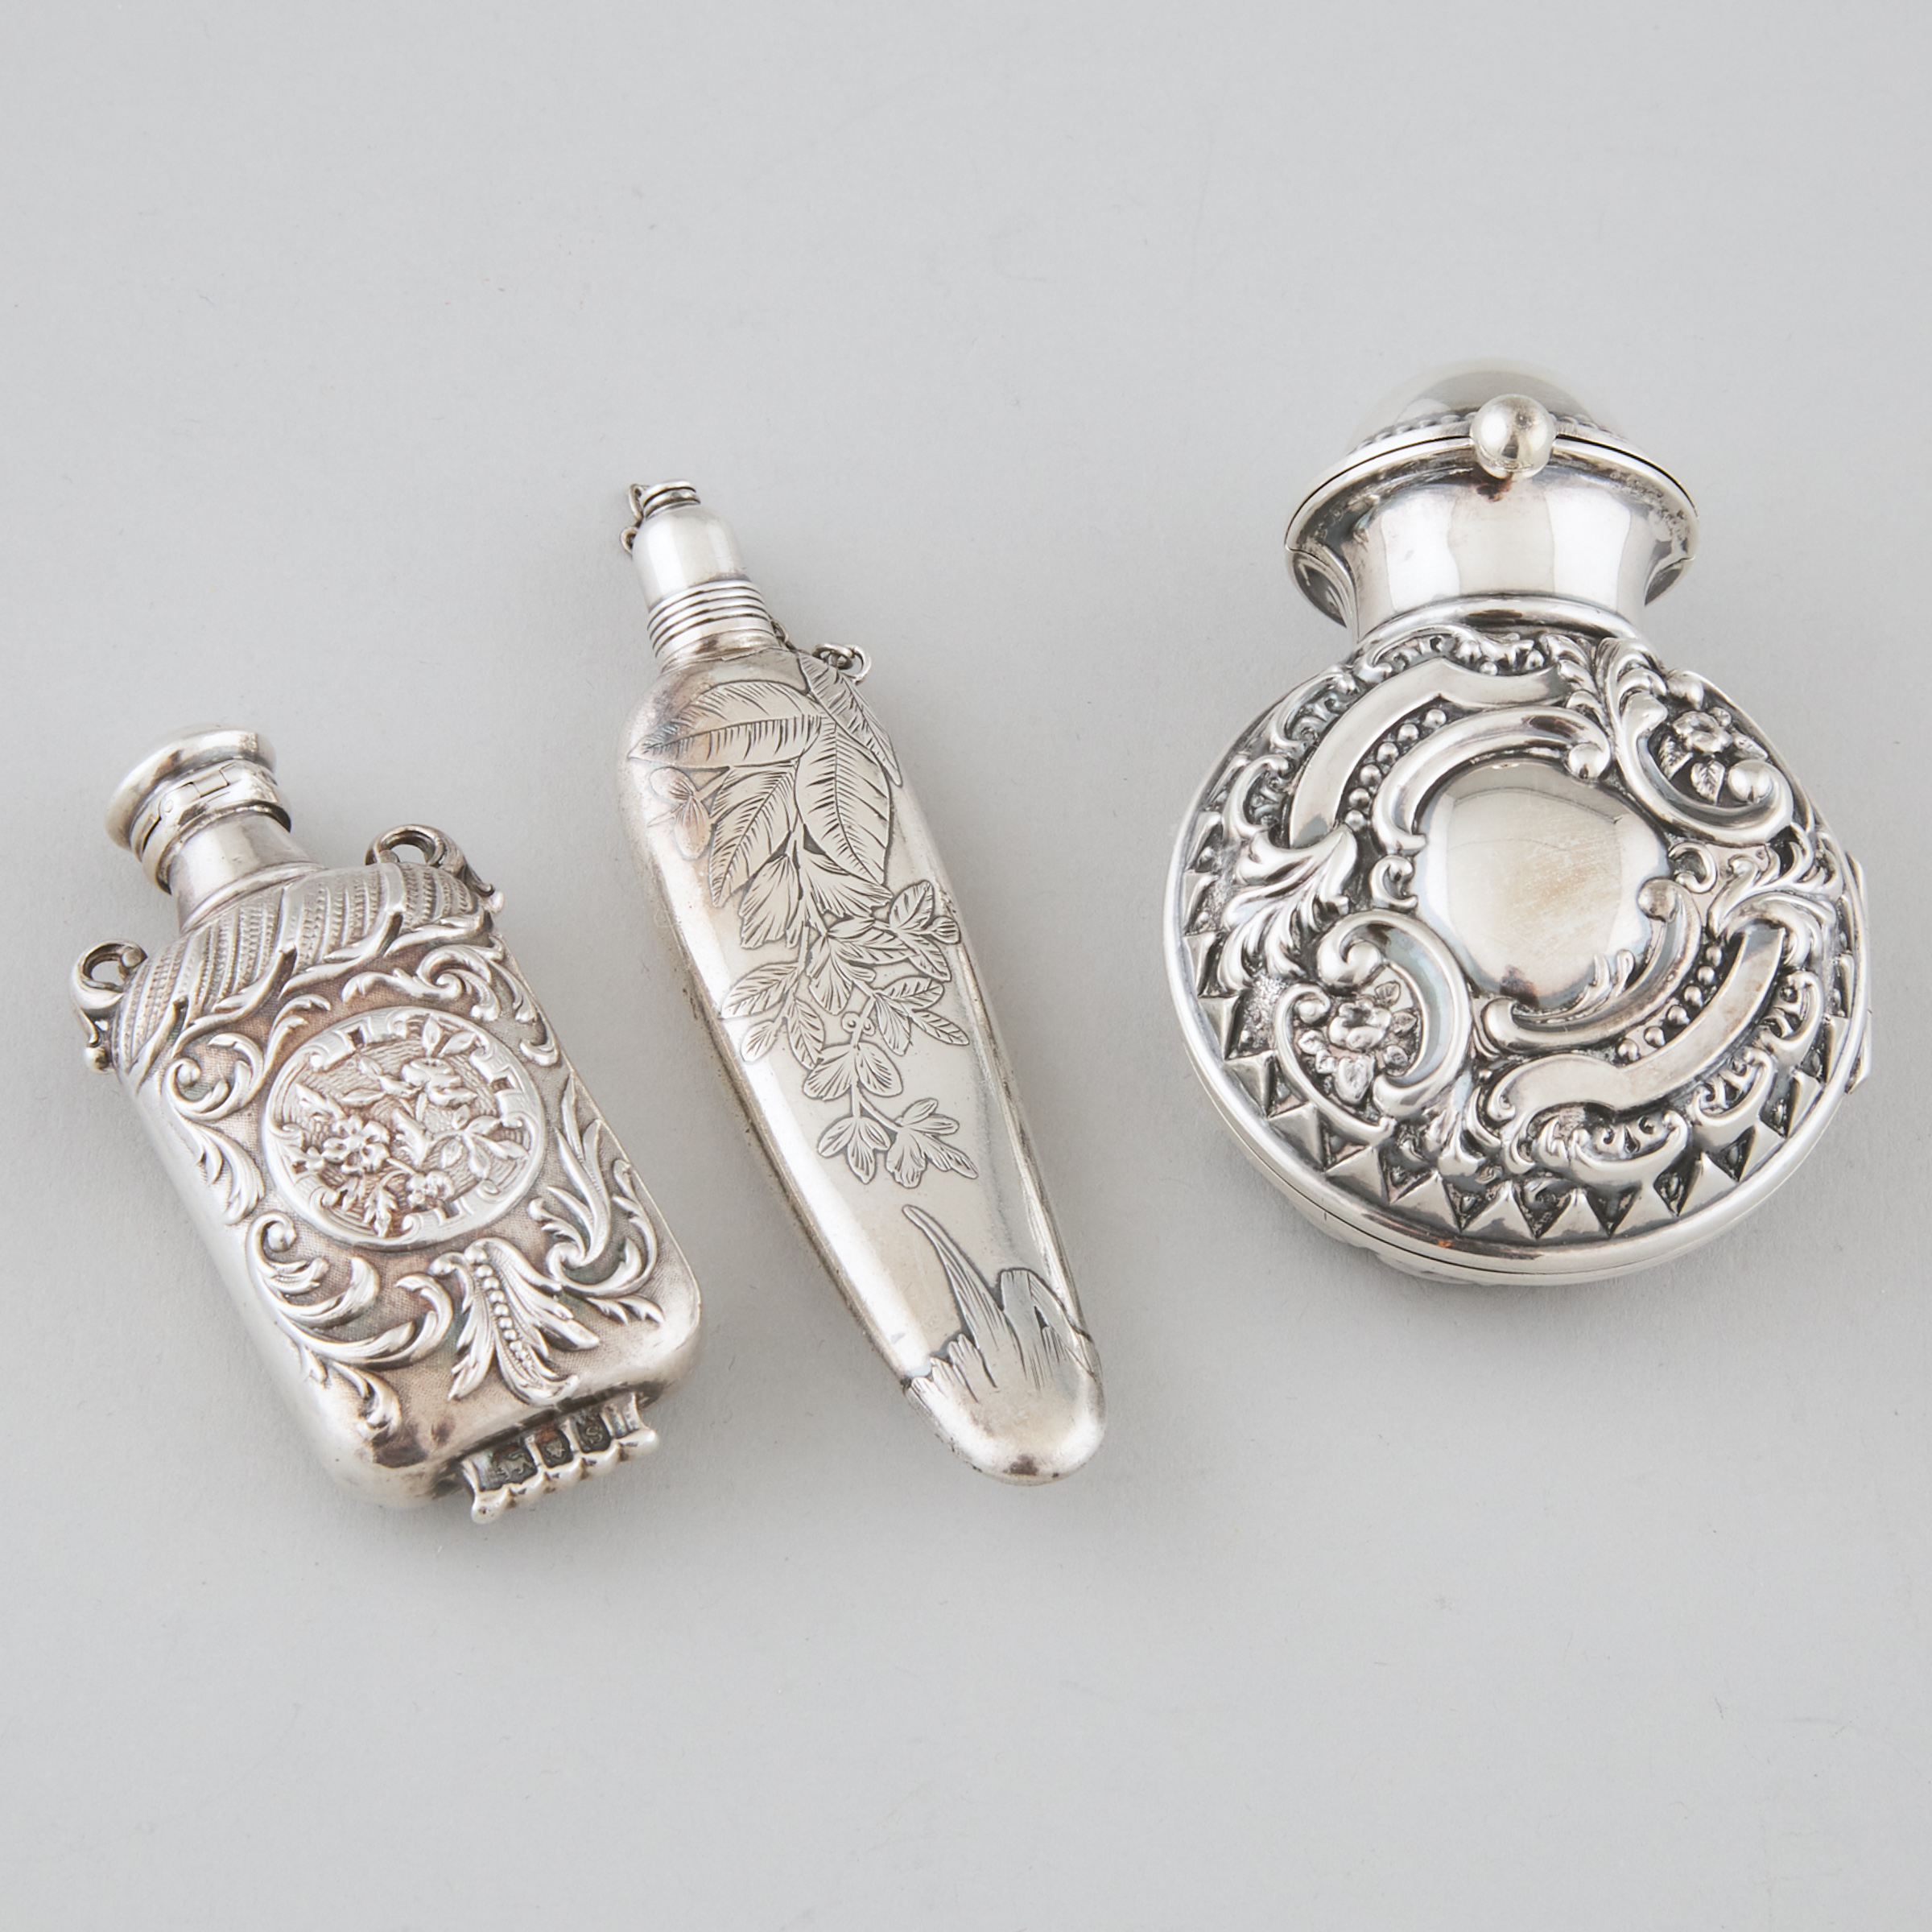 Three Victorian, Edwardian and American Silver Perfume Bottles, late 19th/early 20th century